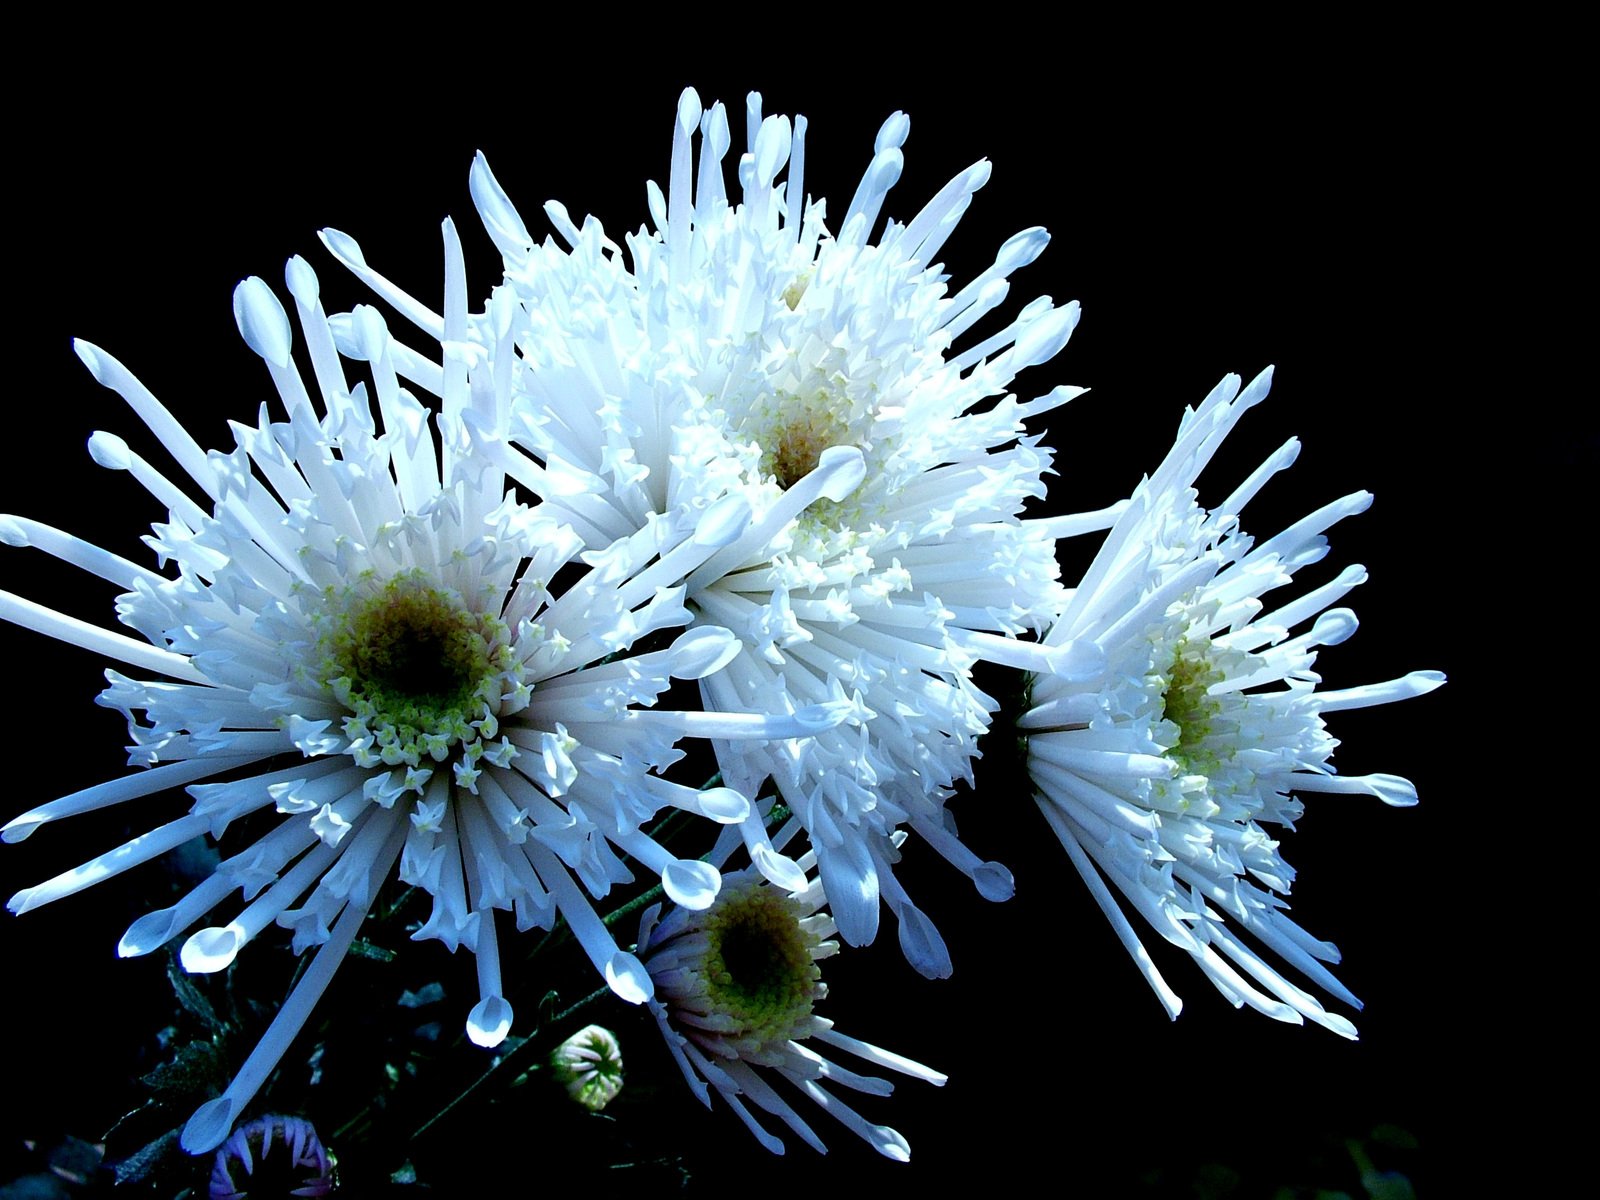 the pograph was taken while it shows white flowers